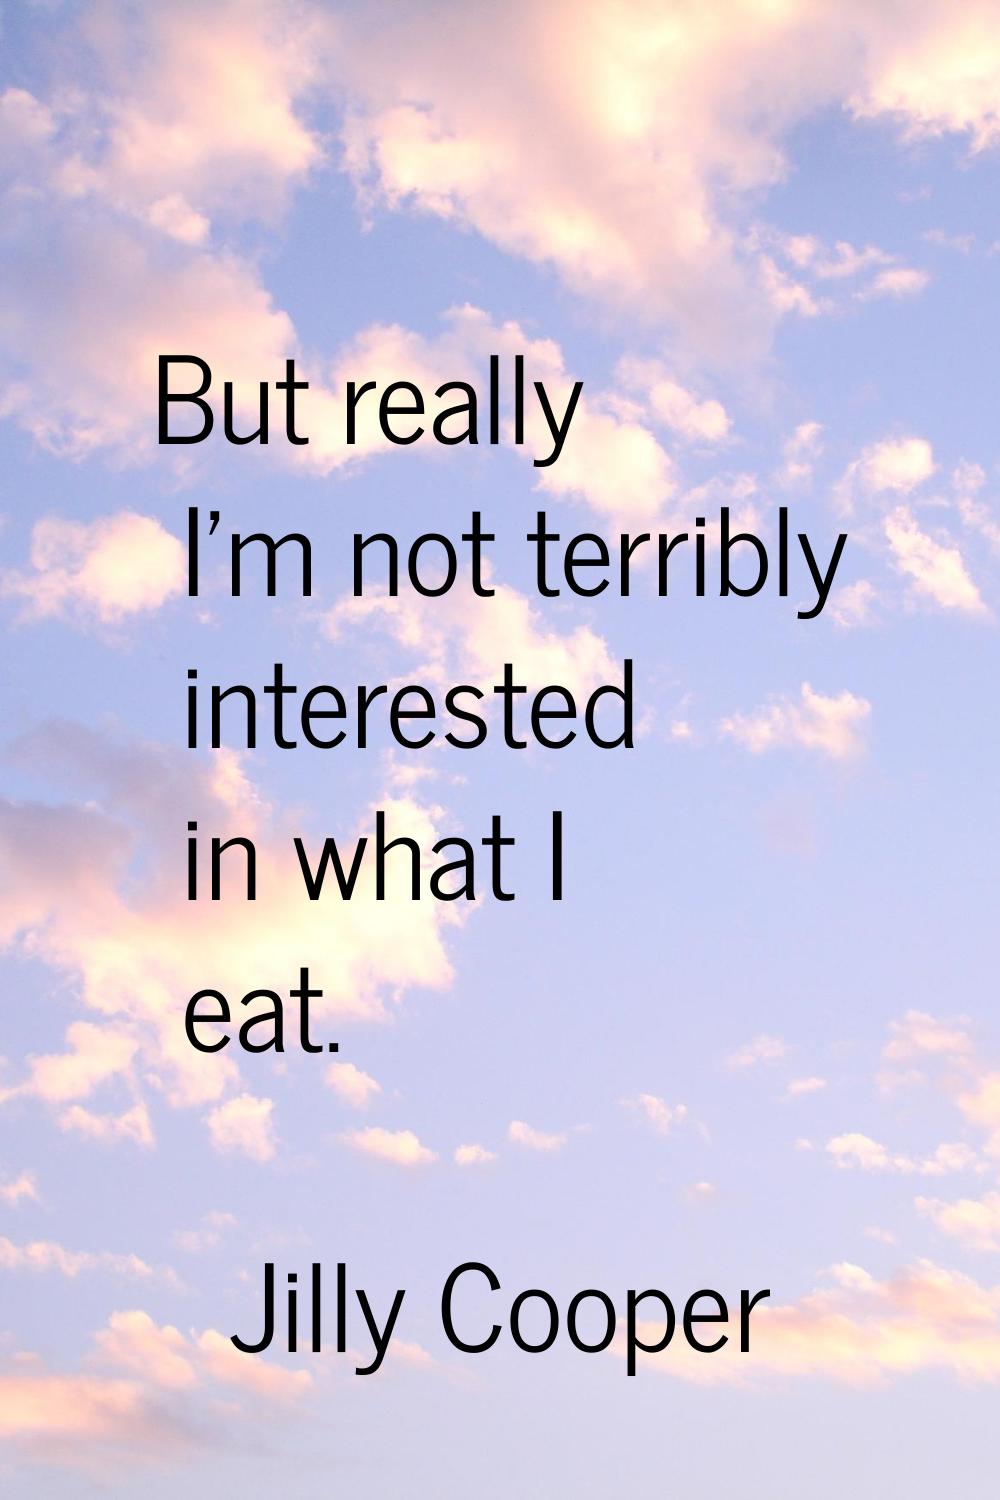 But really I'm not terribly interested in what I eat.